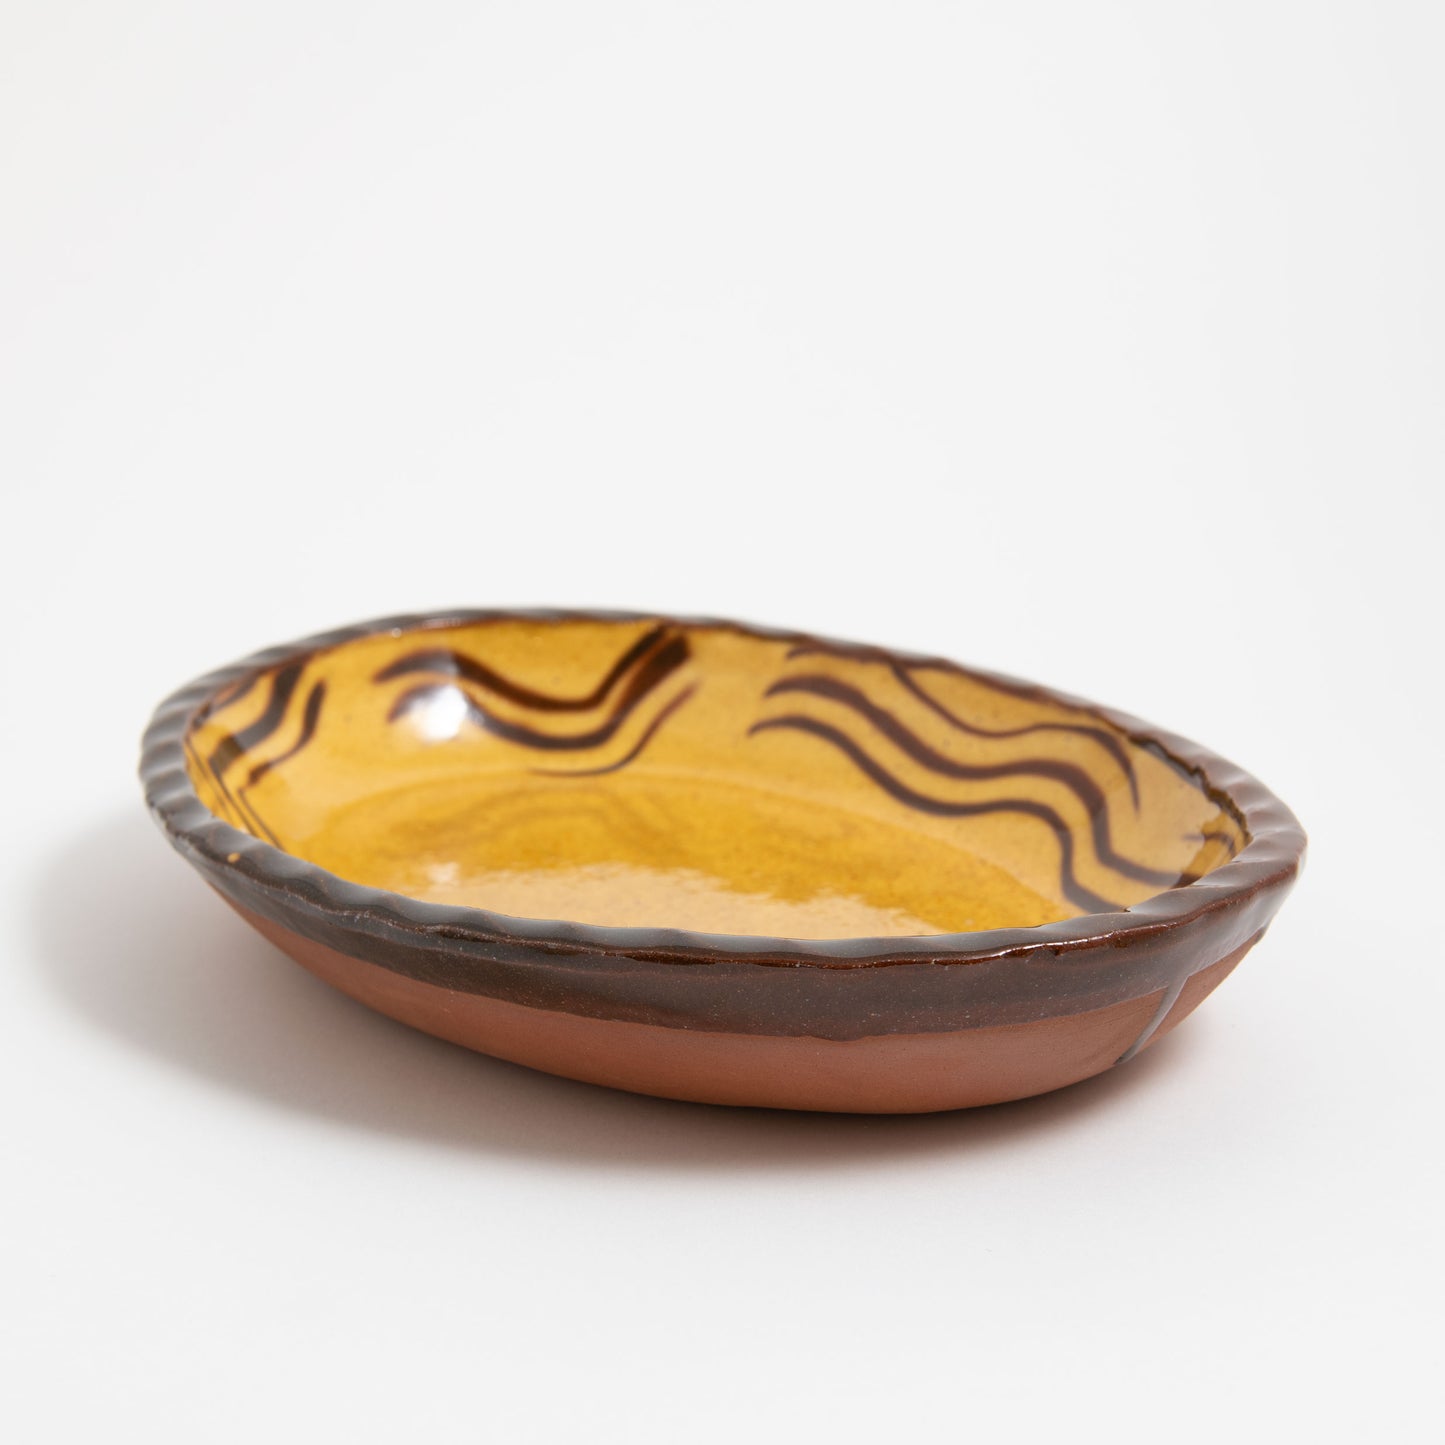 Small Oval Dish